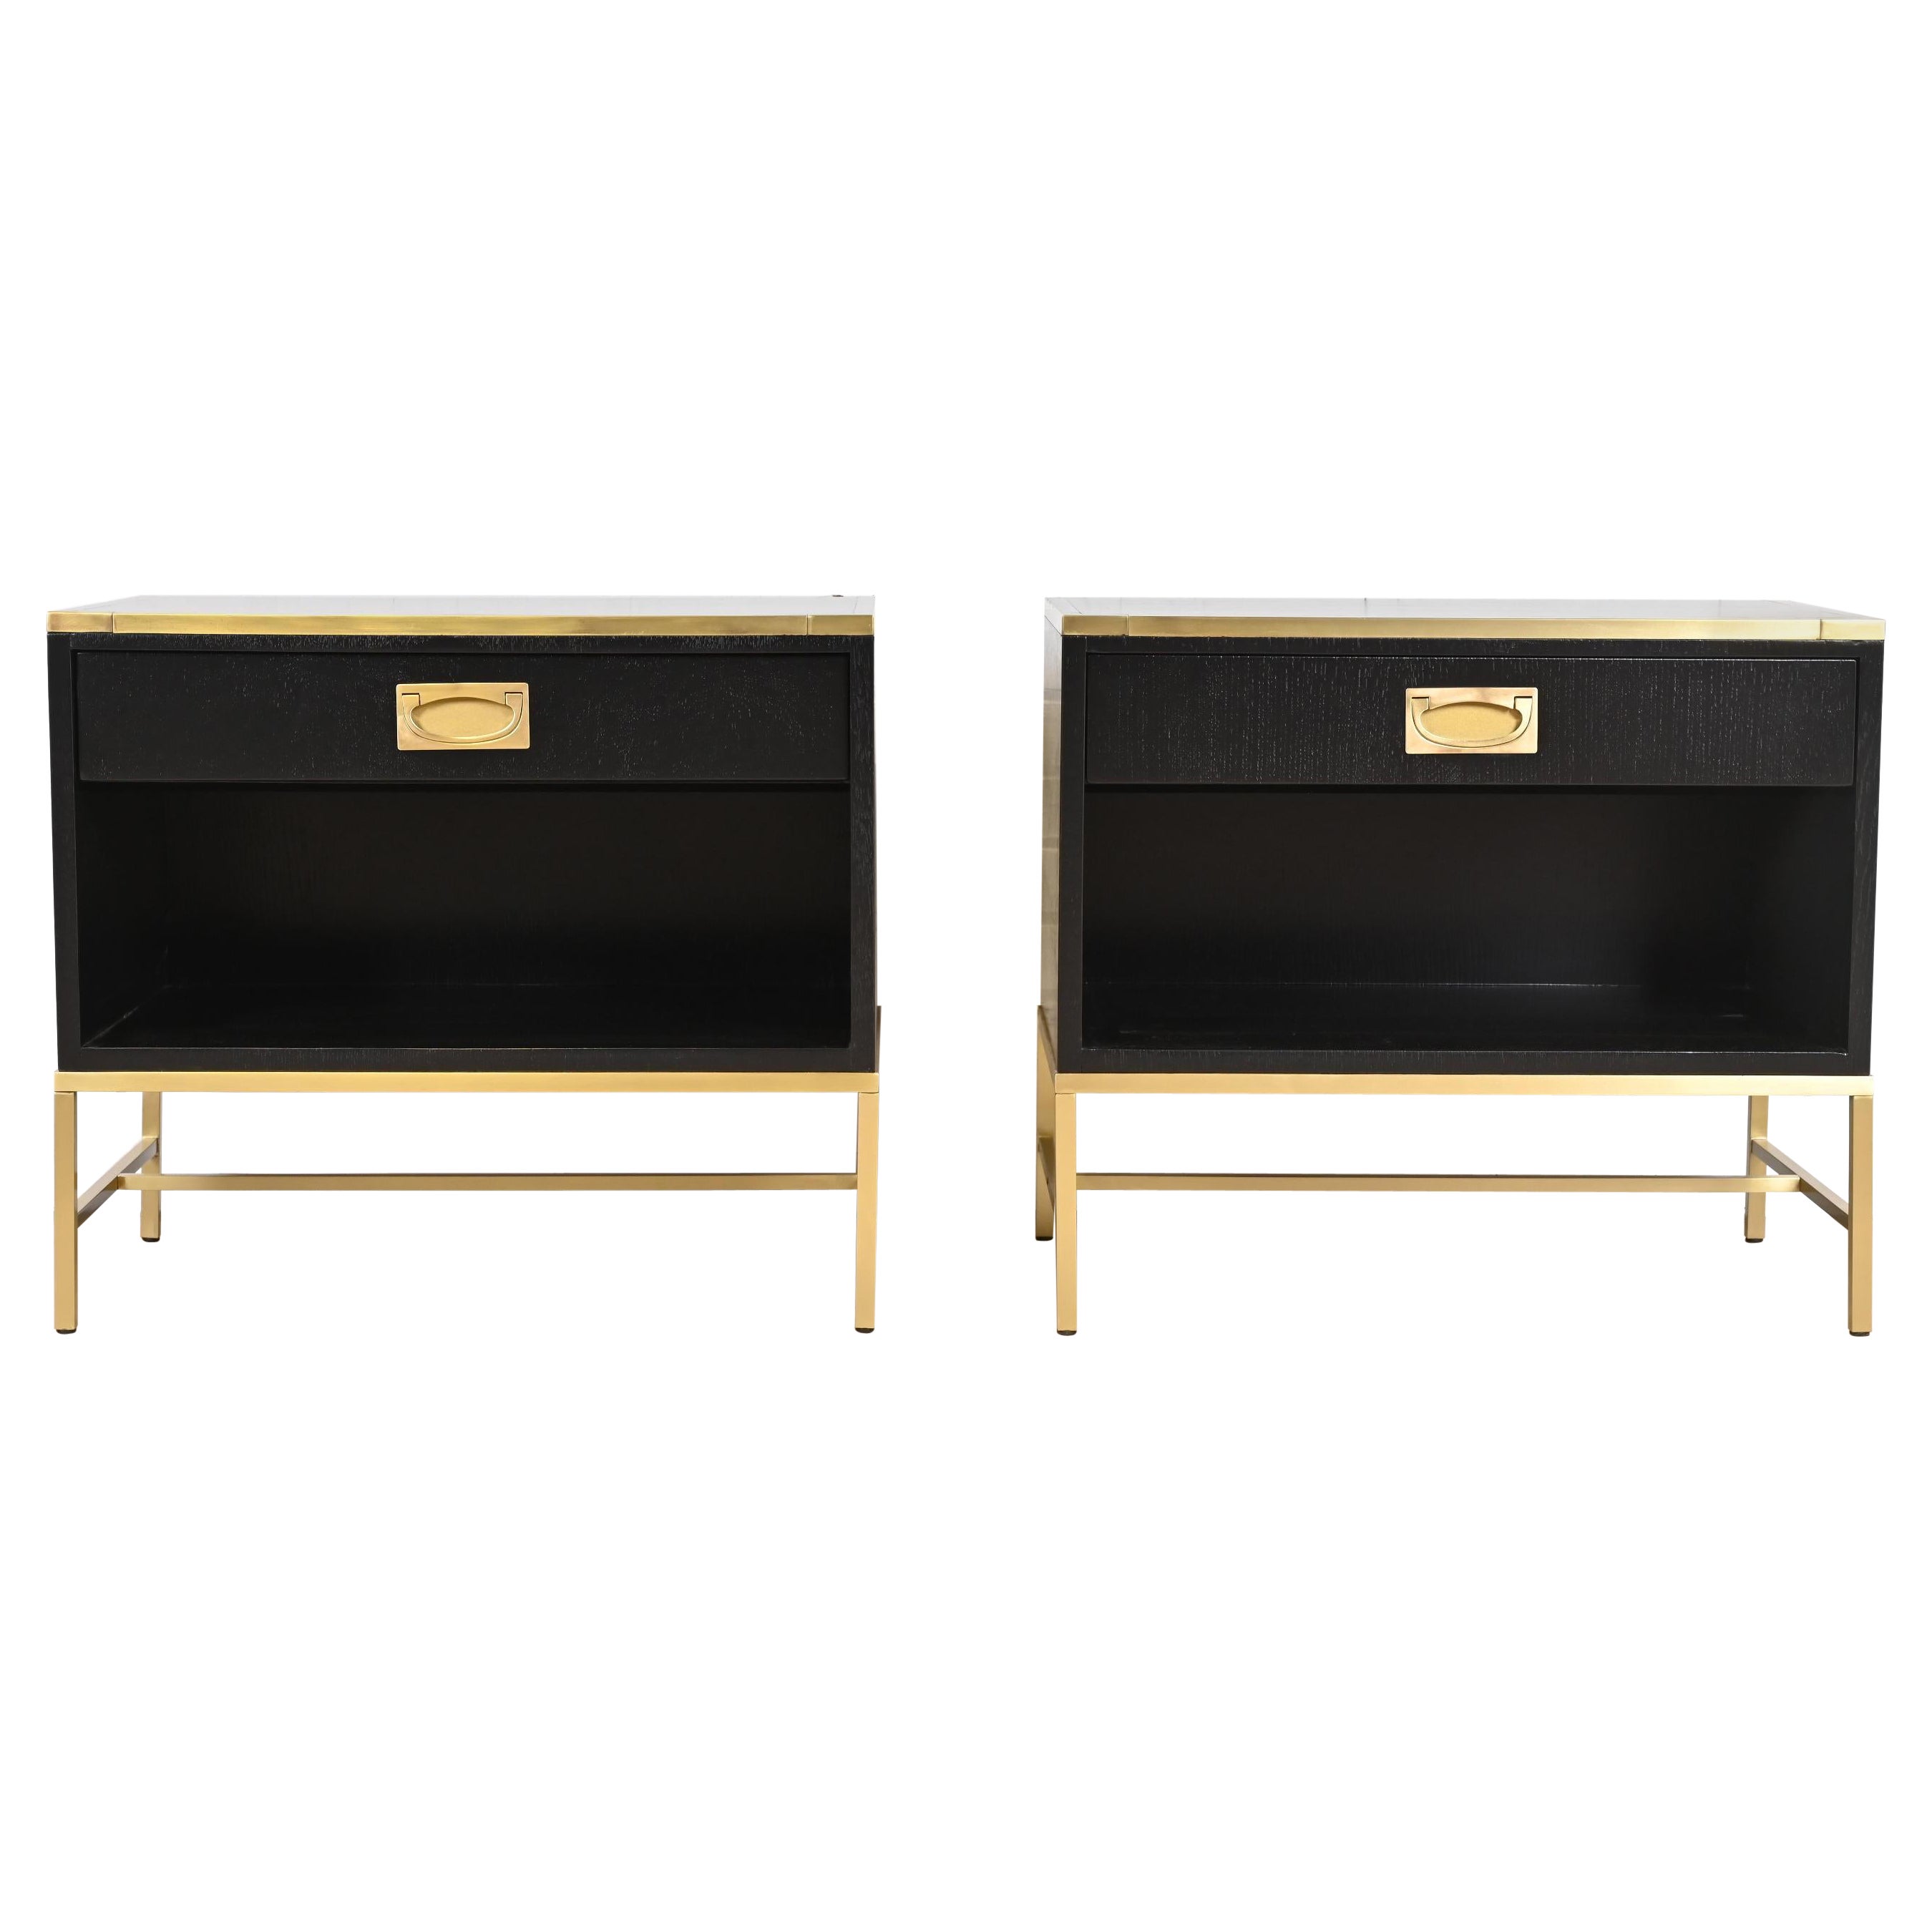 Thomas Pheasant for Baker Campaign Black Lacquer and Brass Nightstands, Pair